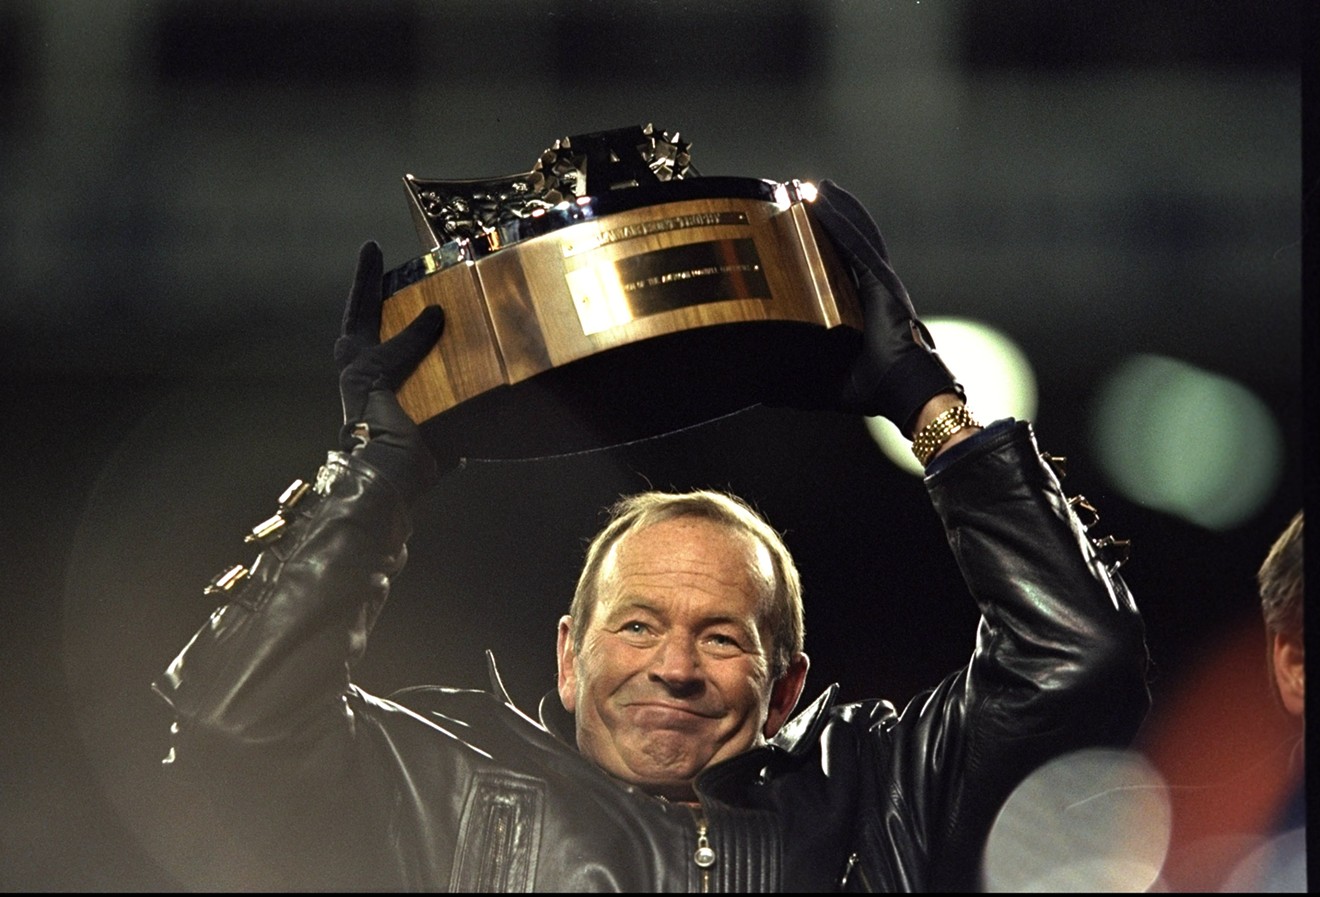 Pat Bowlen holds up the trophy after the Denver Broncos won the AFC Championship Game at Mile High Stadium in 1999.